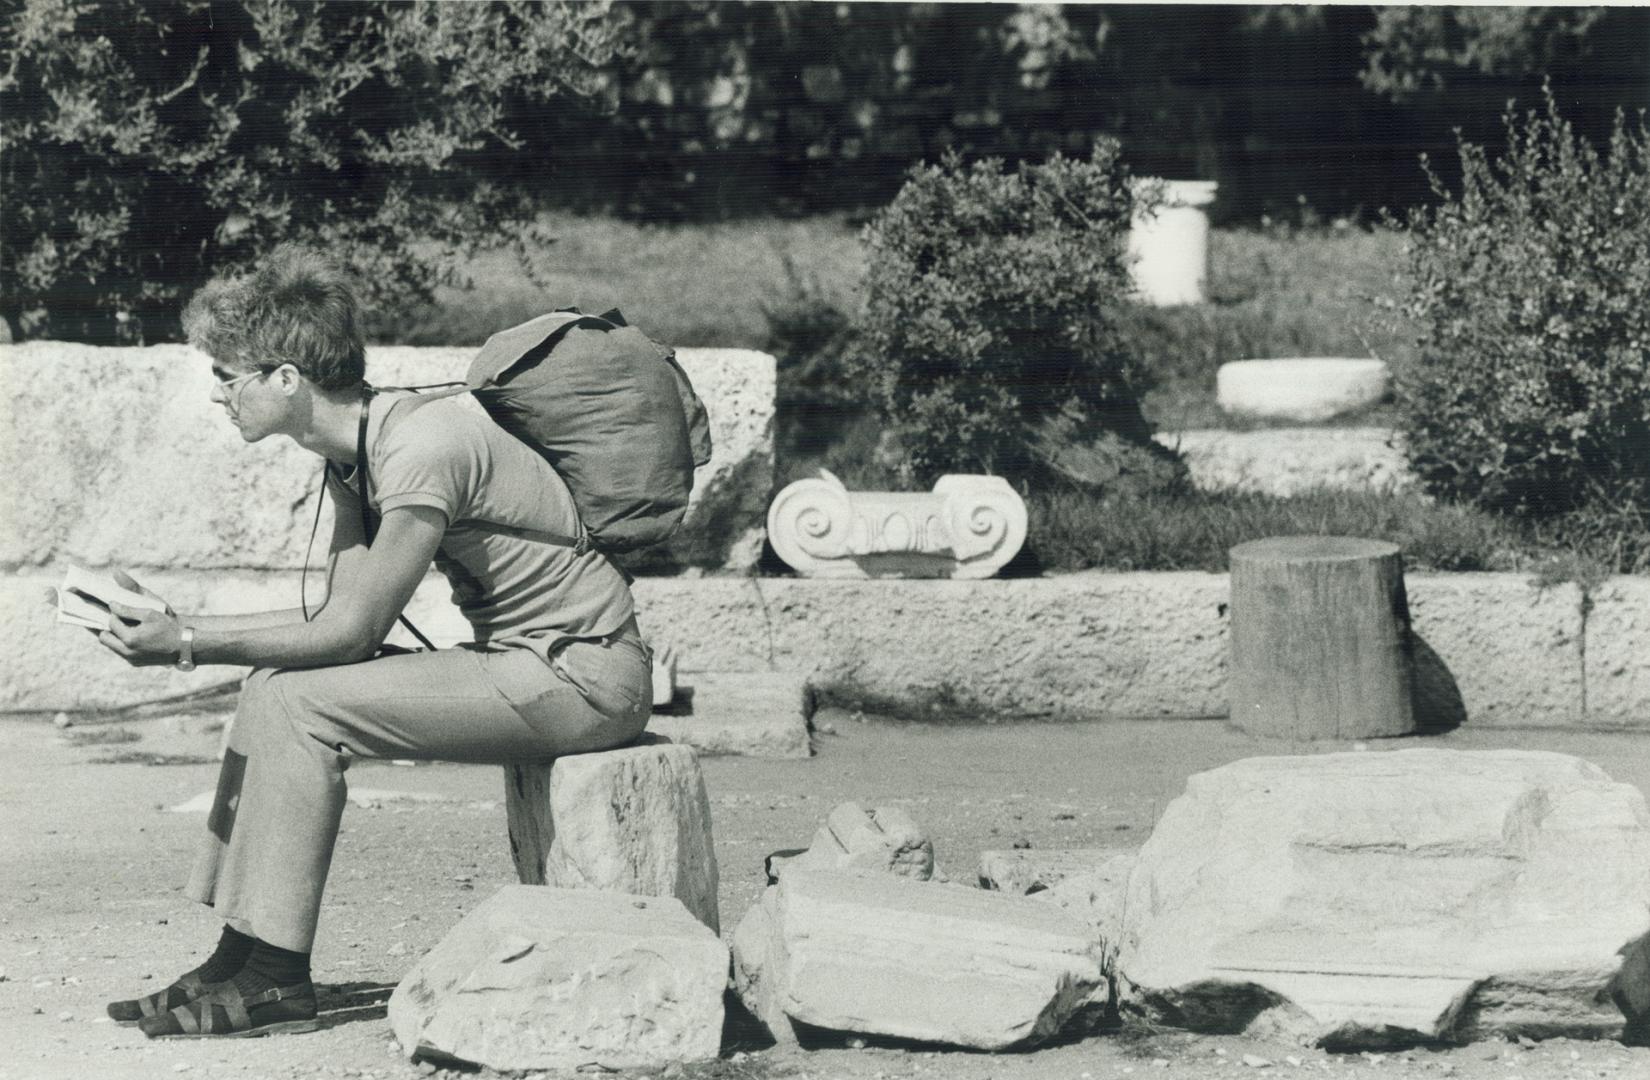 Among the ruins: Backpacker sits near temple of Zeus in Athens